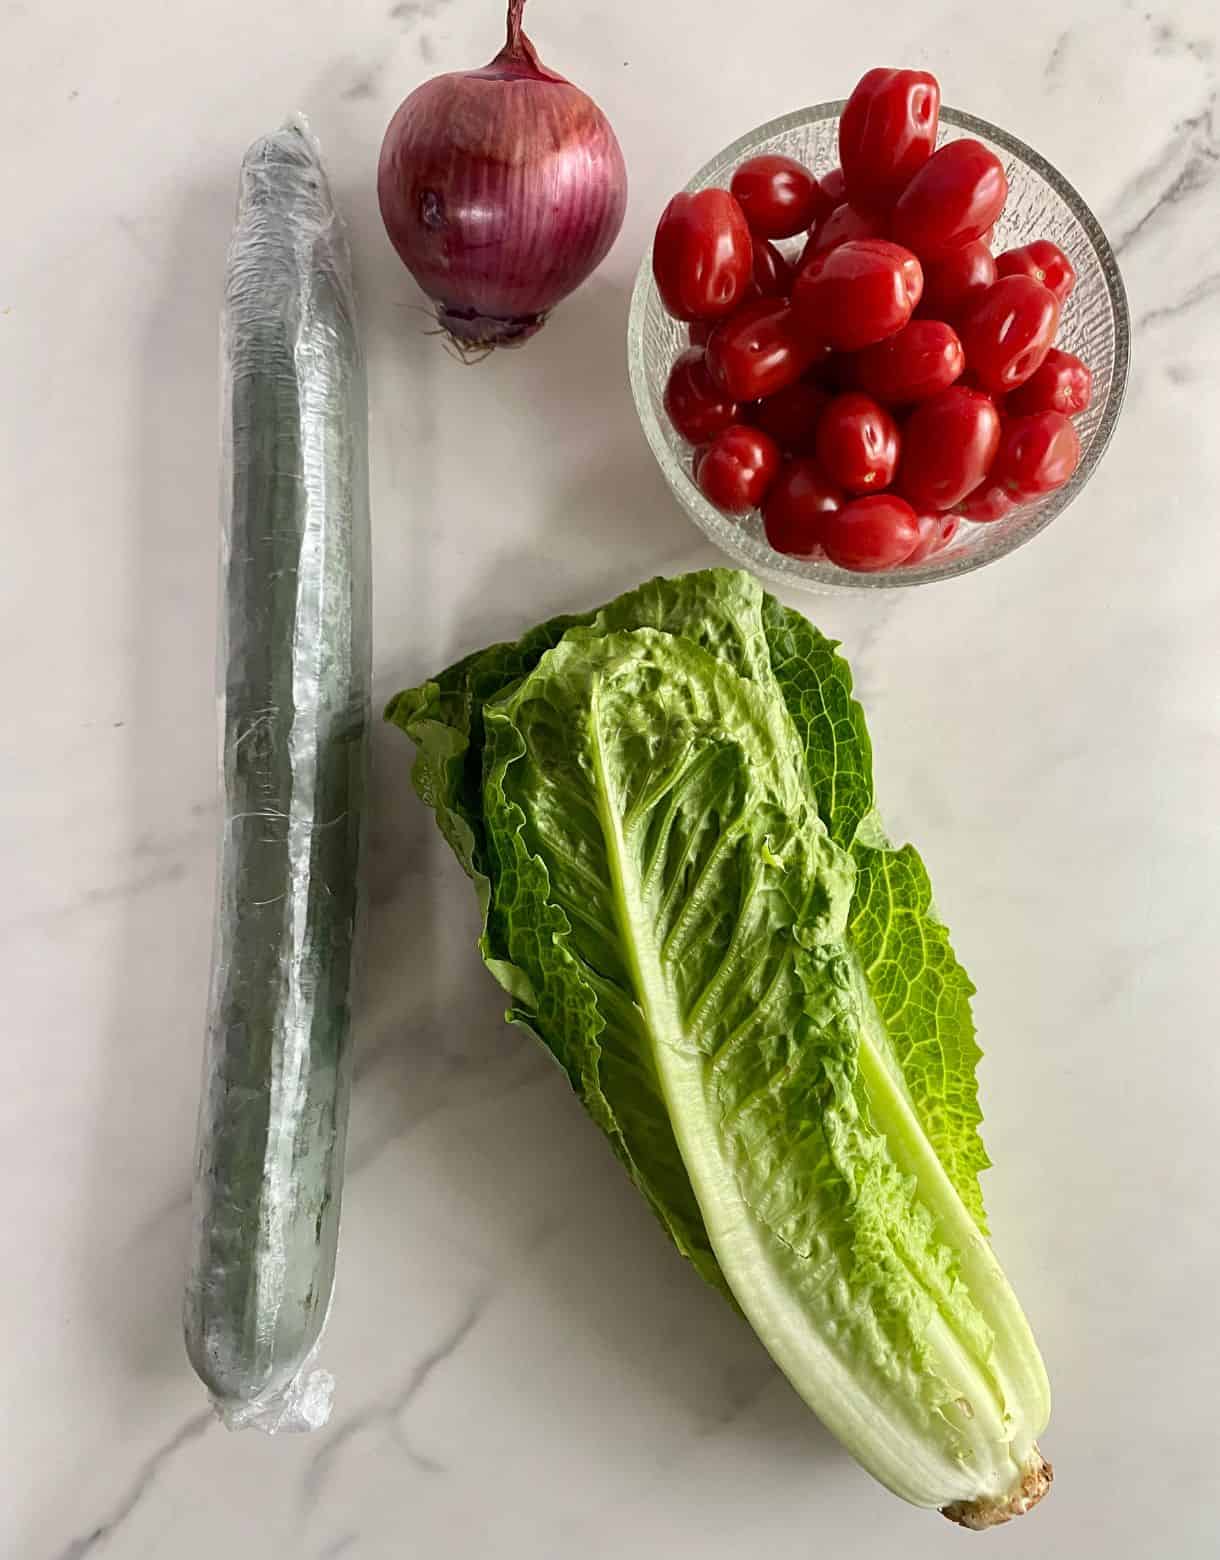 Romaine lettuce, a cucumber, a red onion and grape tomatoes.